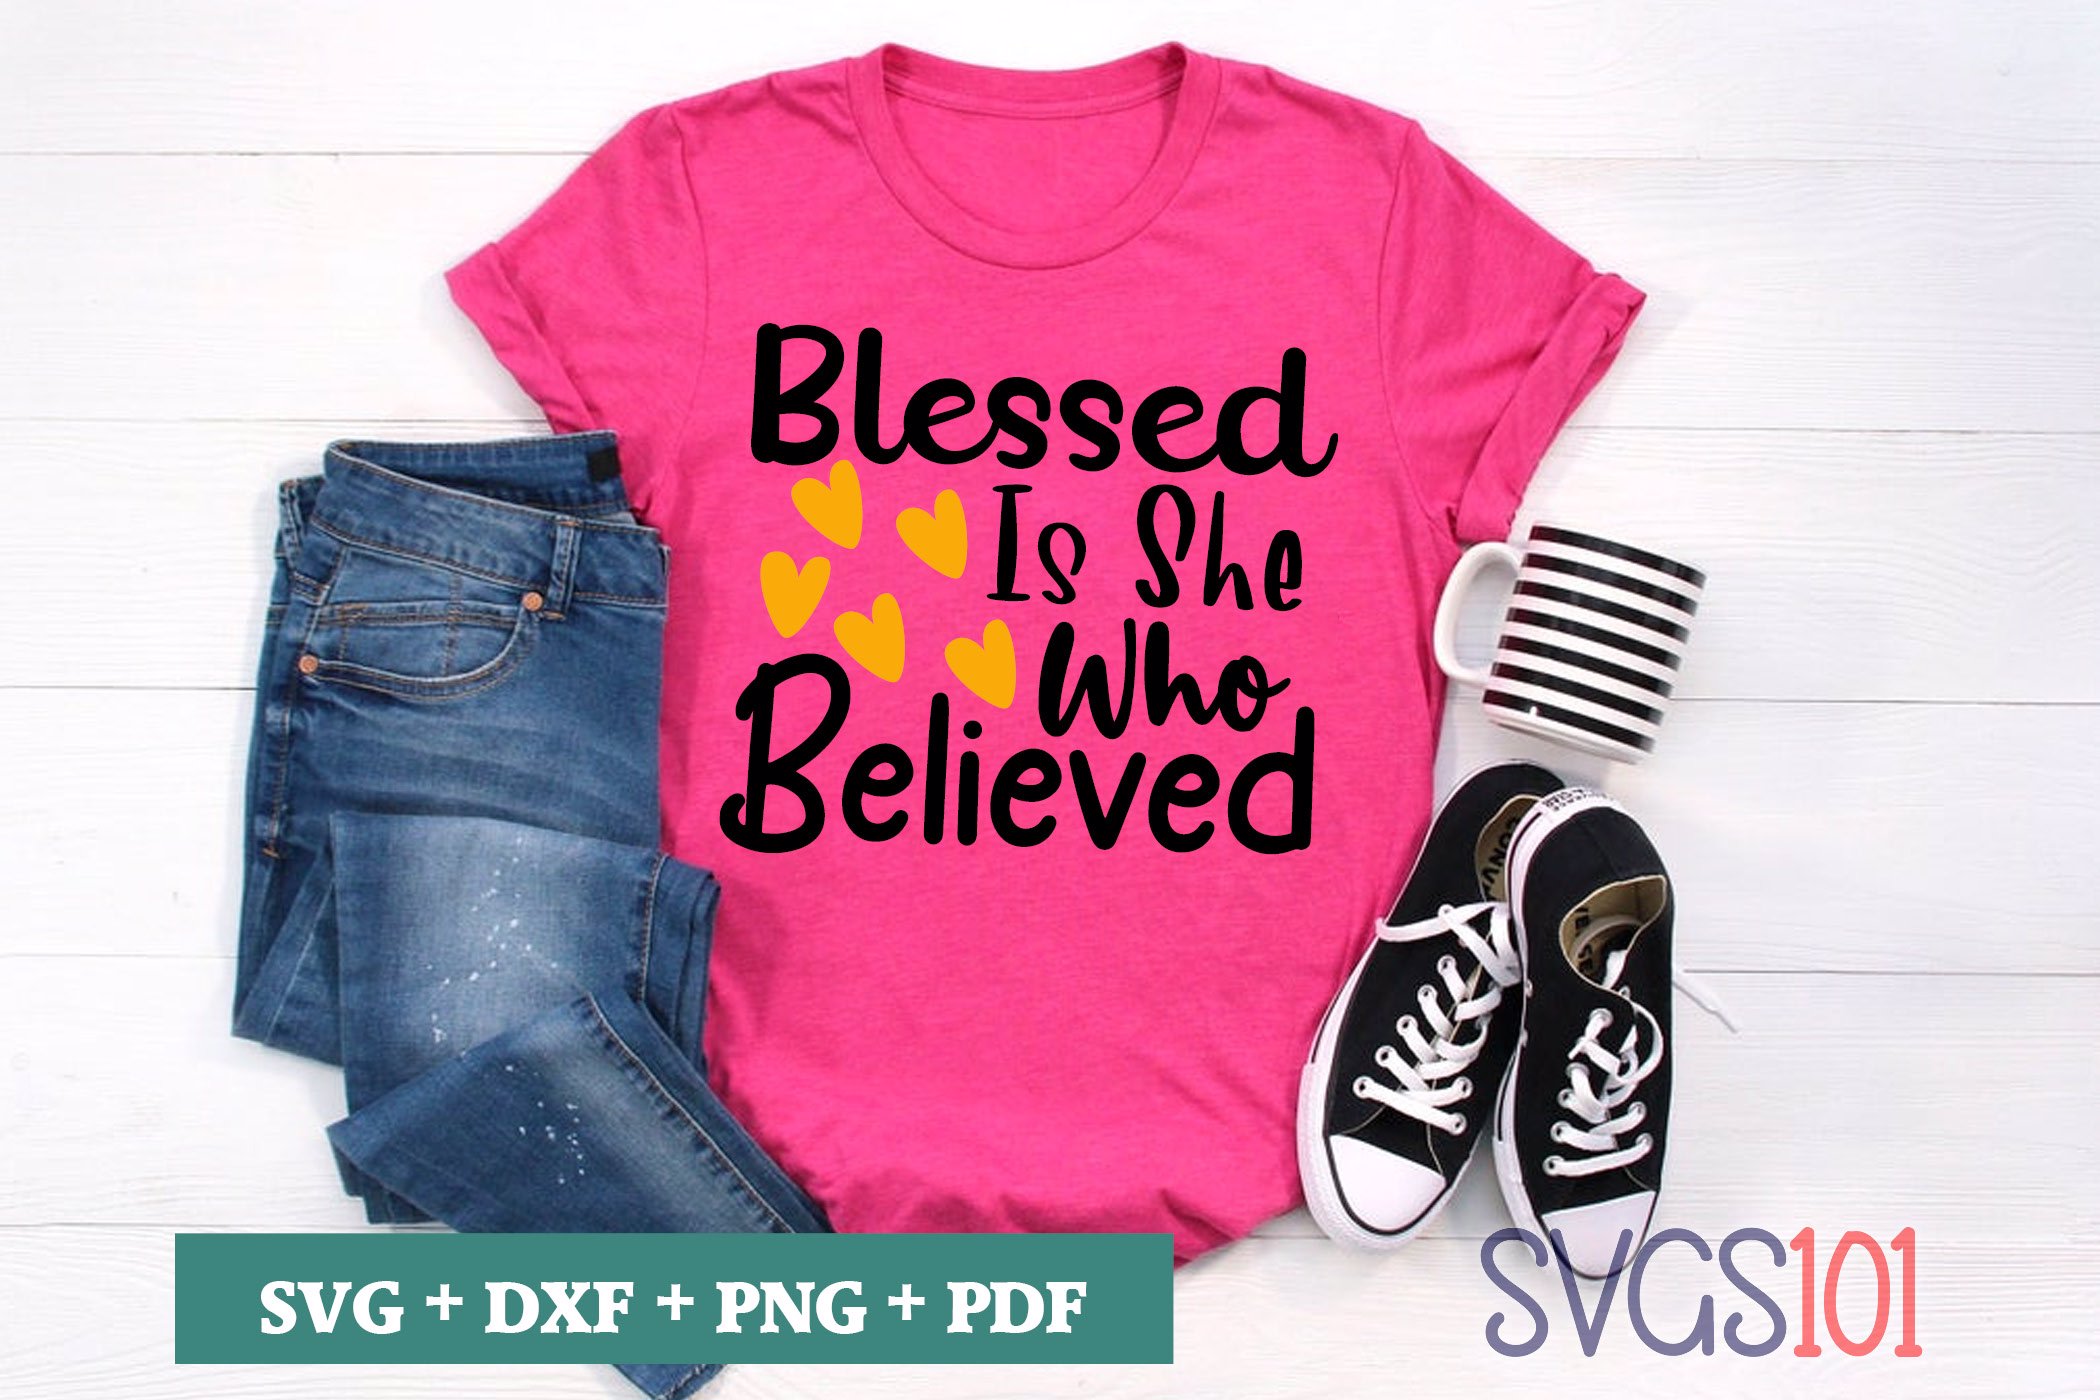 Blessed Is She Who Believed SVG Cuttable File DXF EPS PNG PDF SVG Cutting File